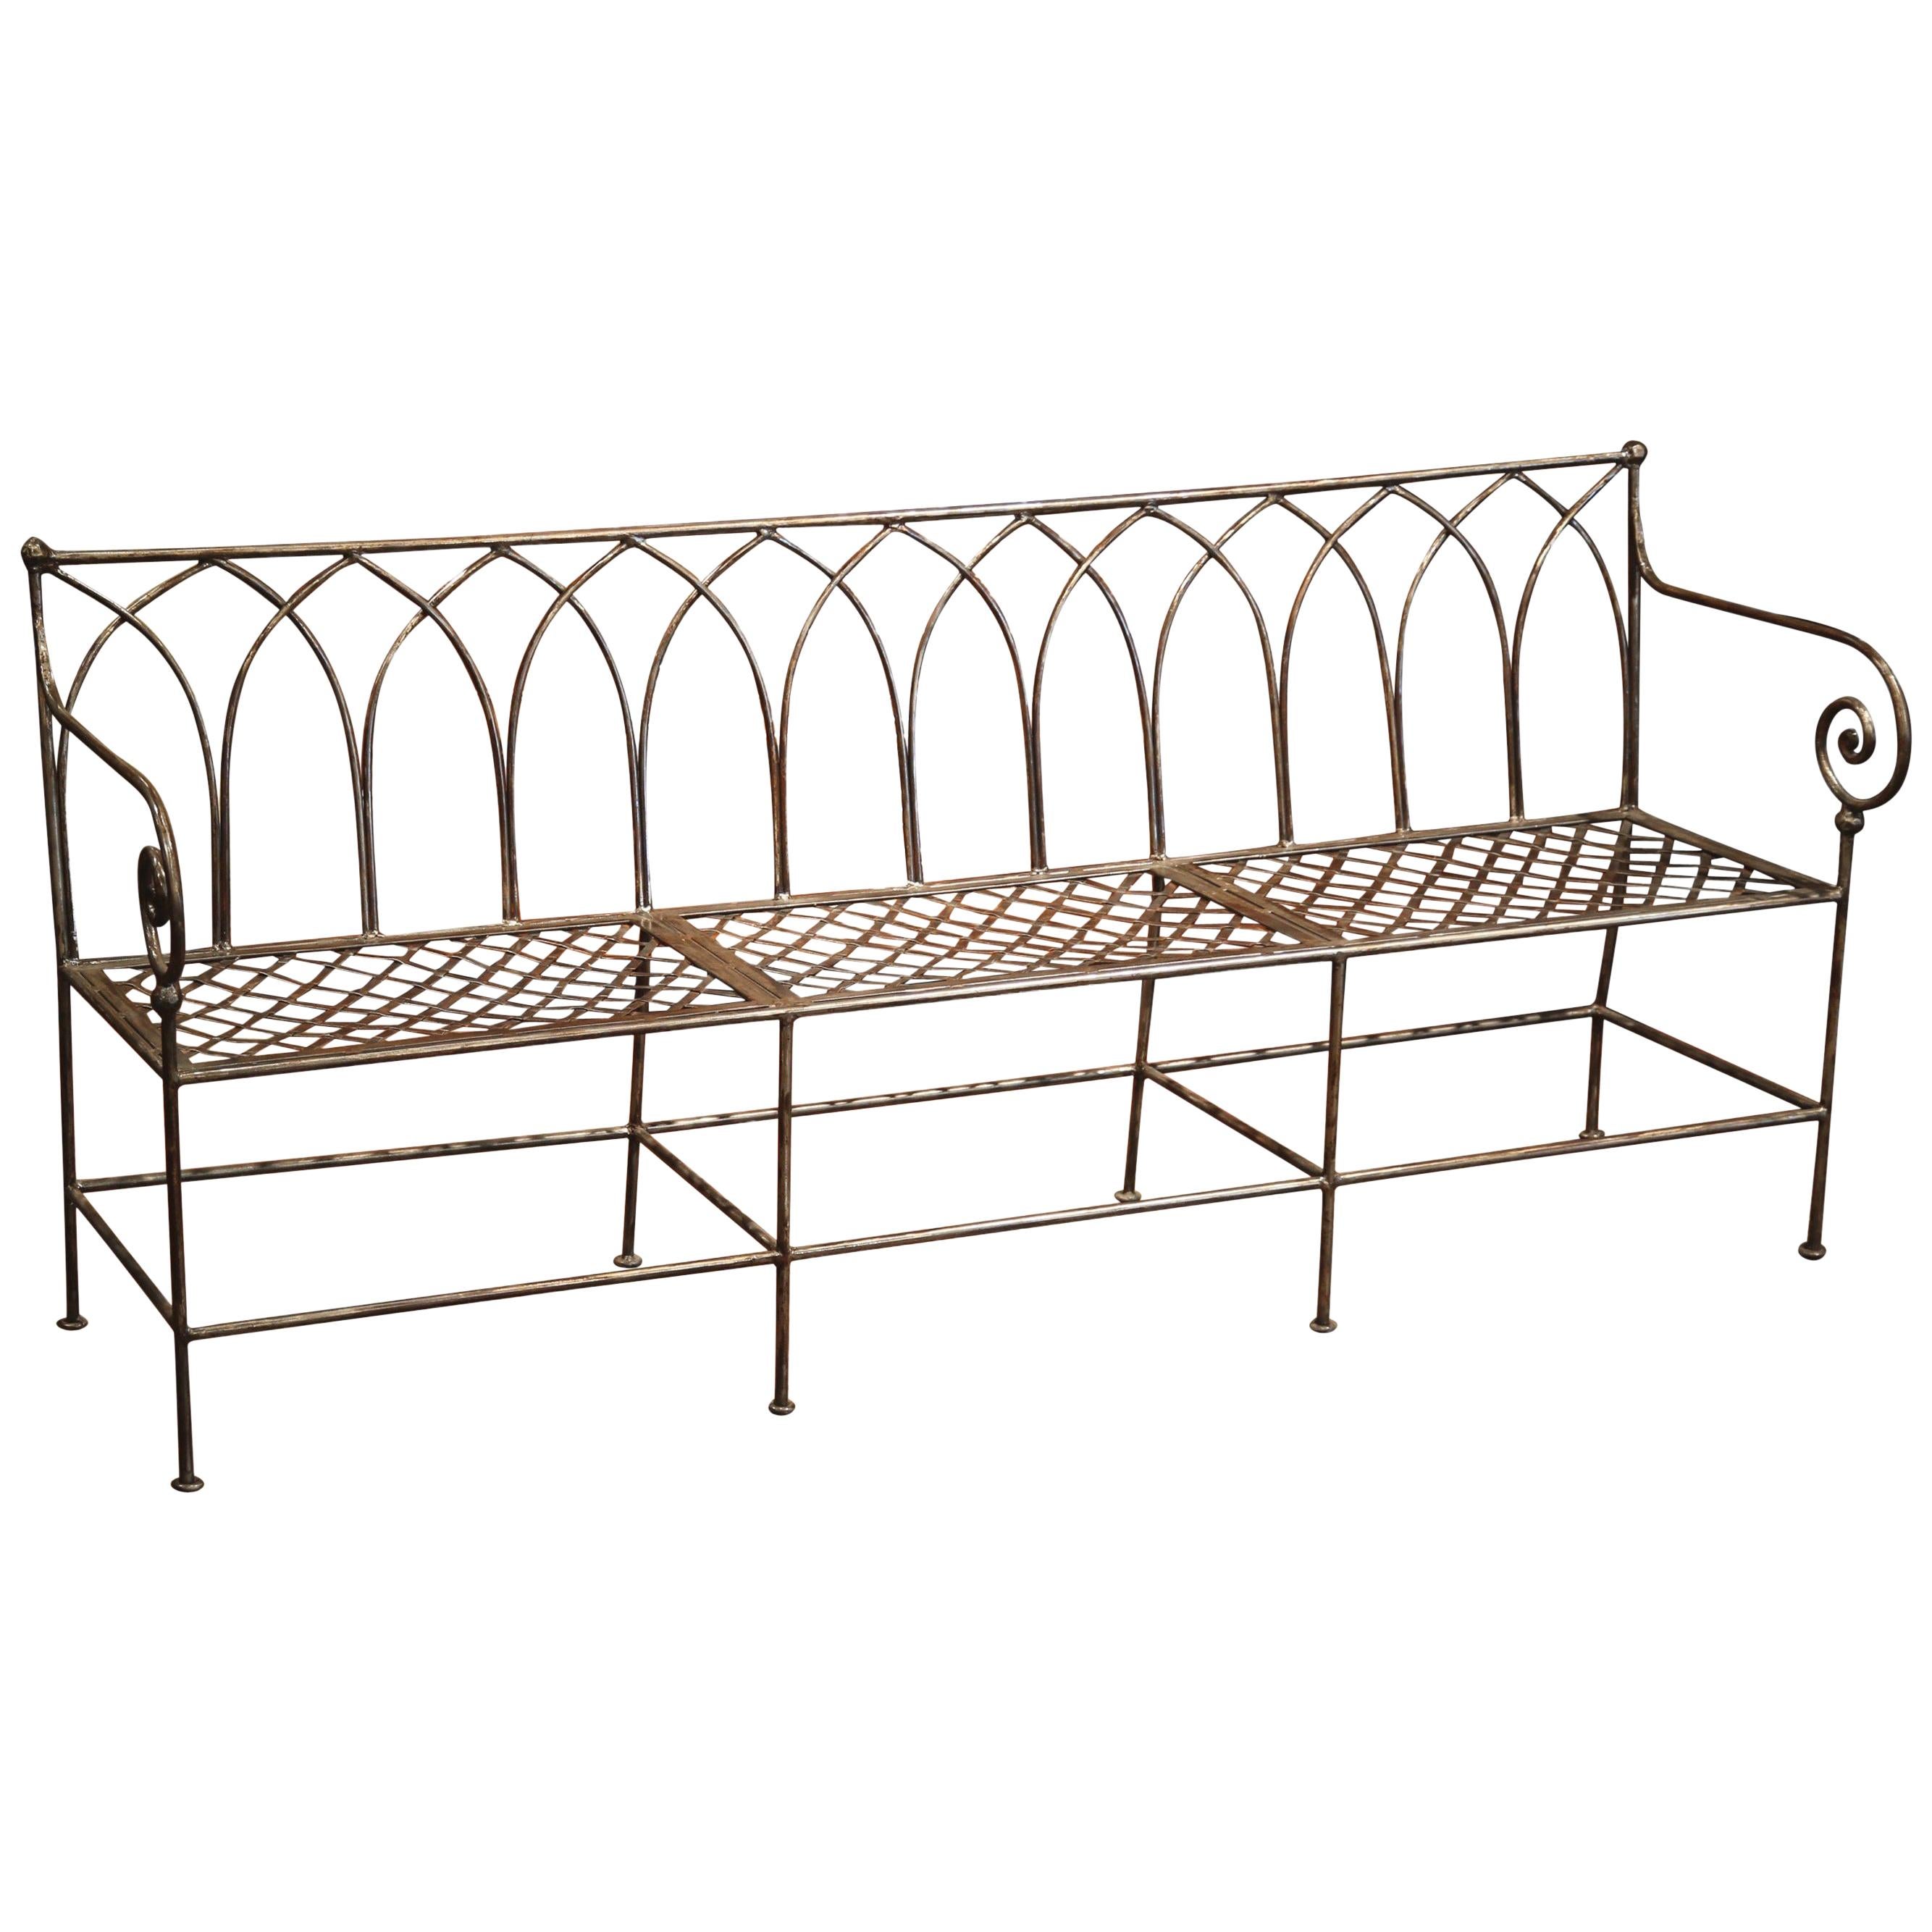 French Empire Style Polished Wrought Iron Three-Seat Bench